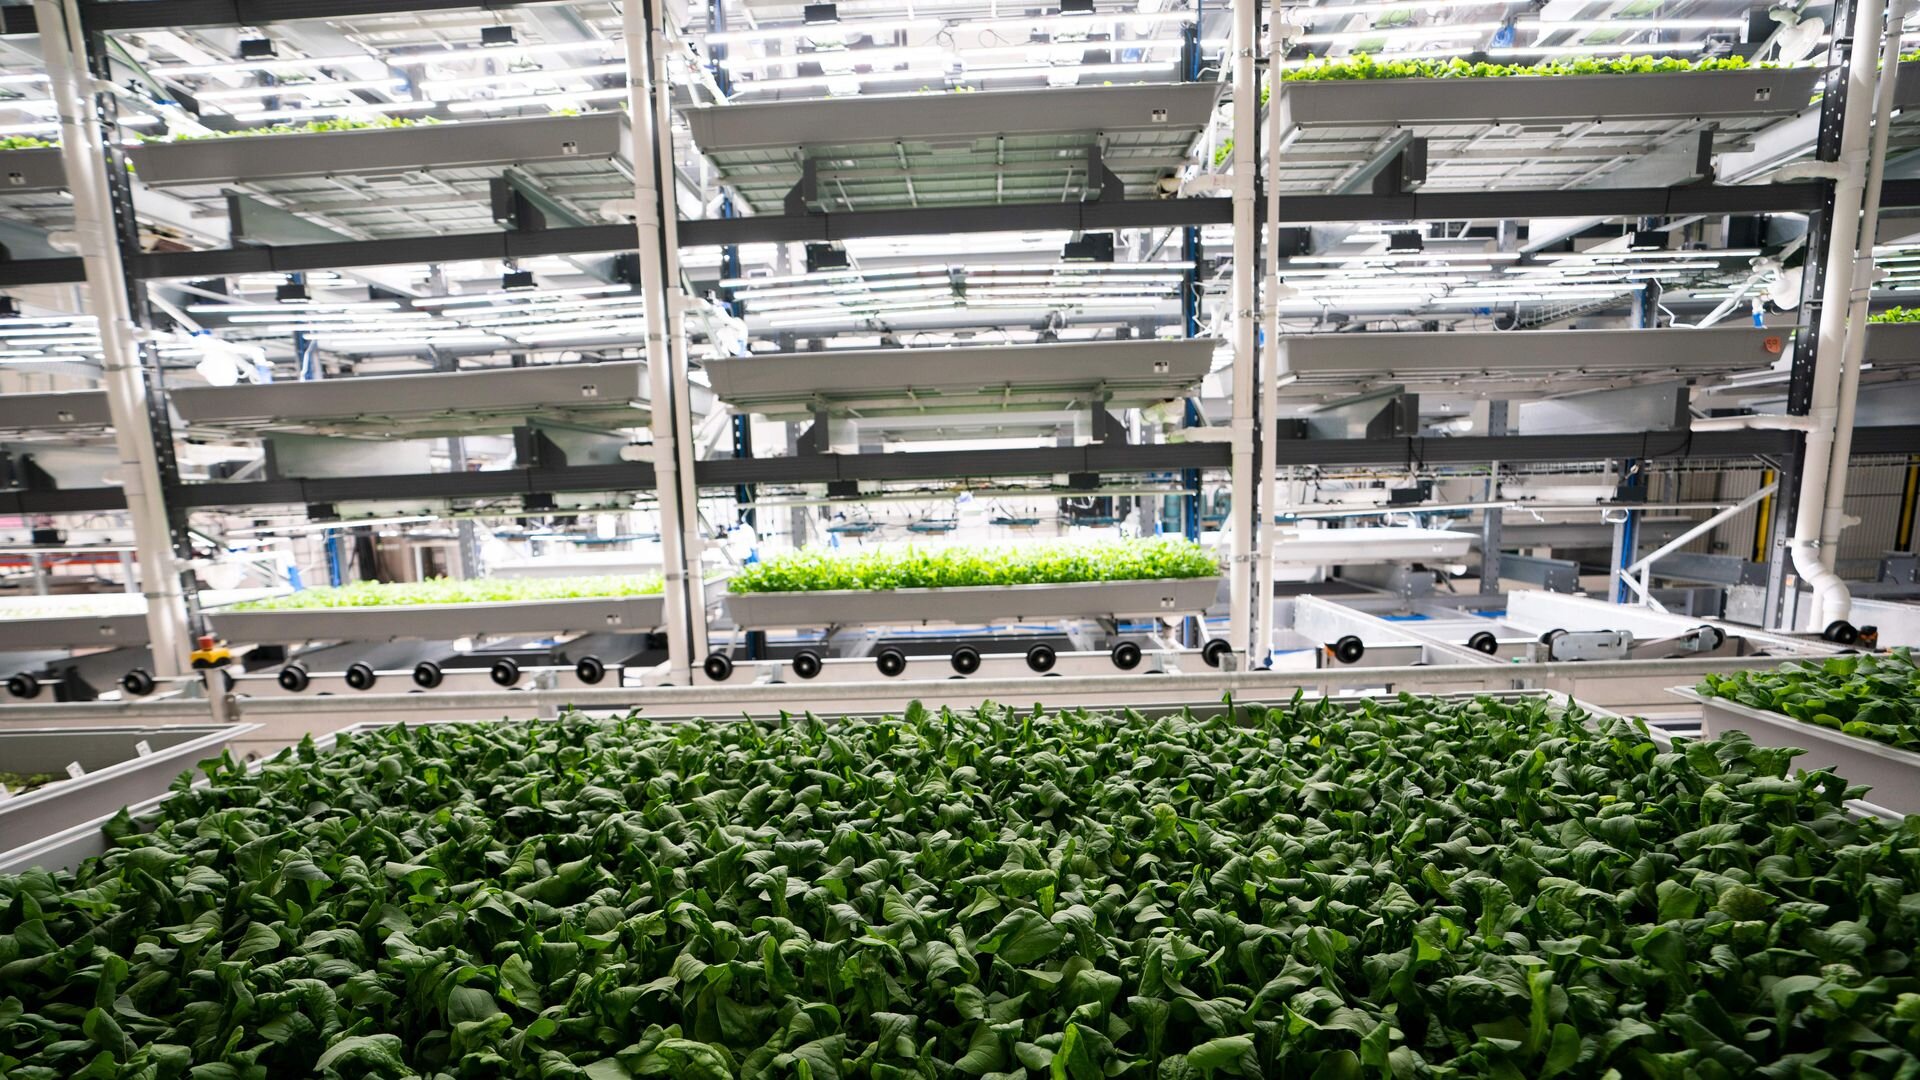 Greens are grown at Bowery Farming, a vertical farm in Kearny, New Jersey. Photo: Don Emmert/AFP via Getty Images.